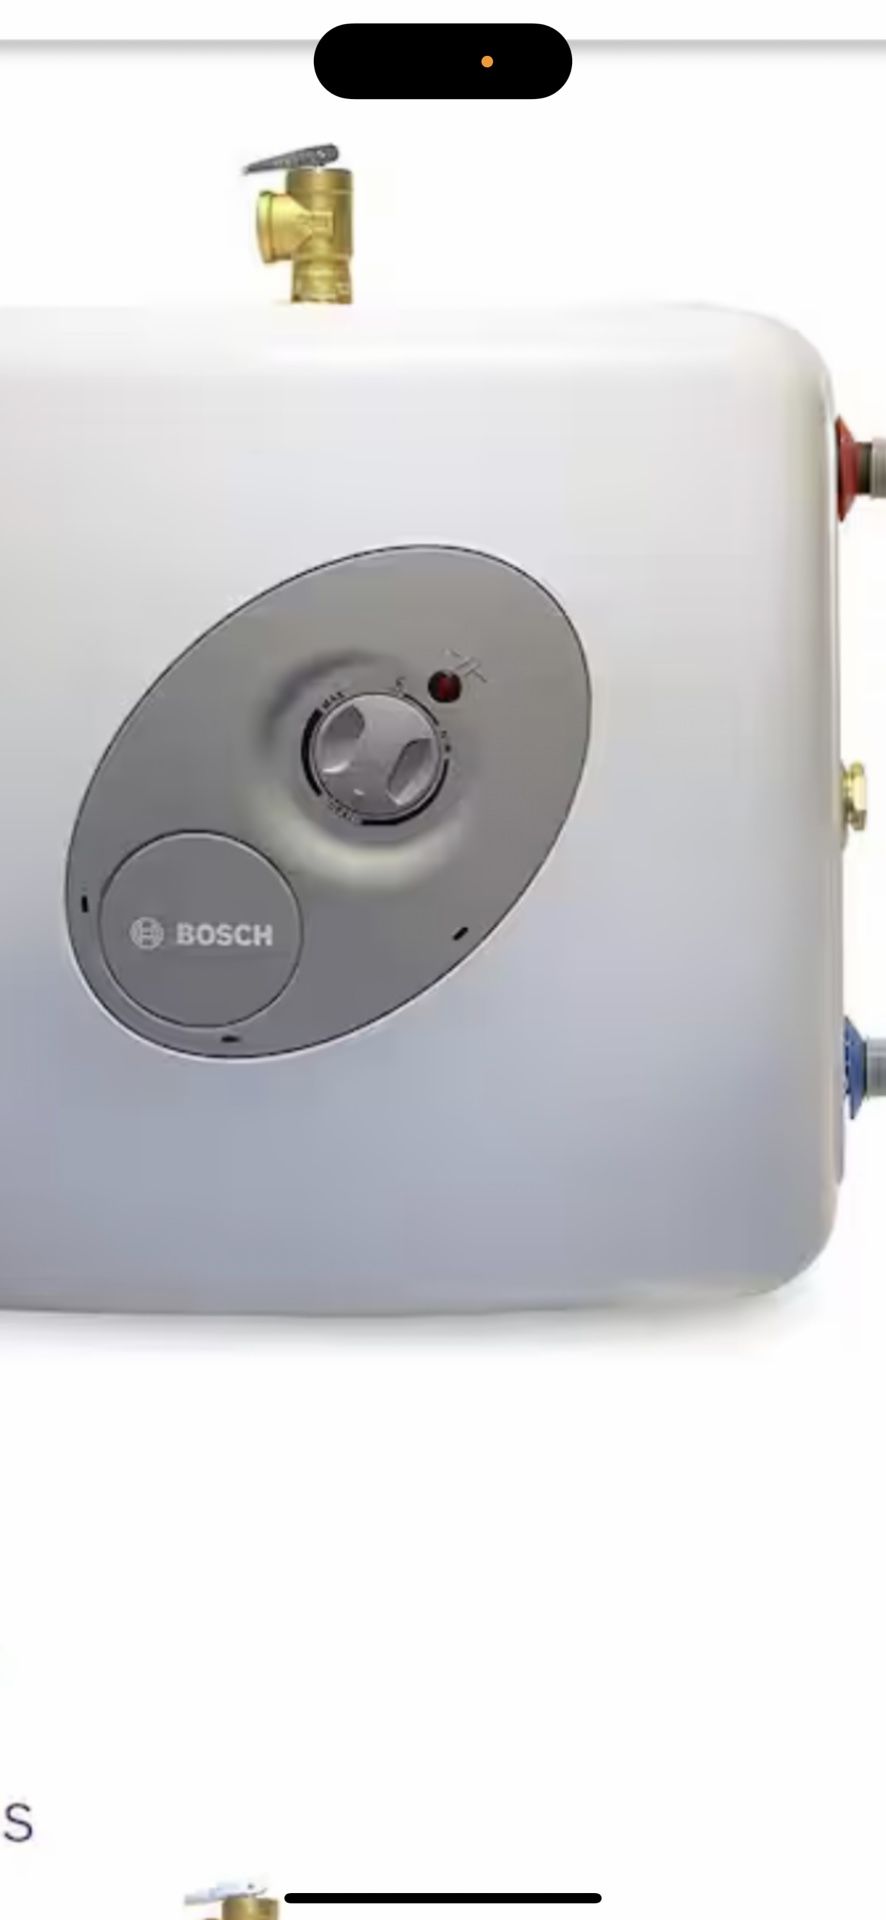 Bosch 7 Gal. Electric Point-of-Use Water Heater